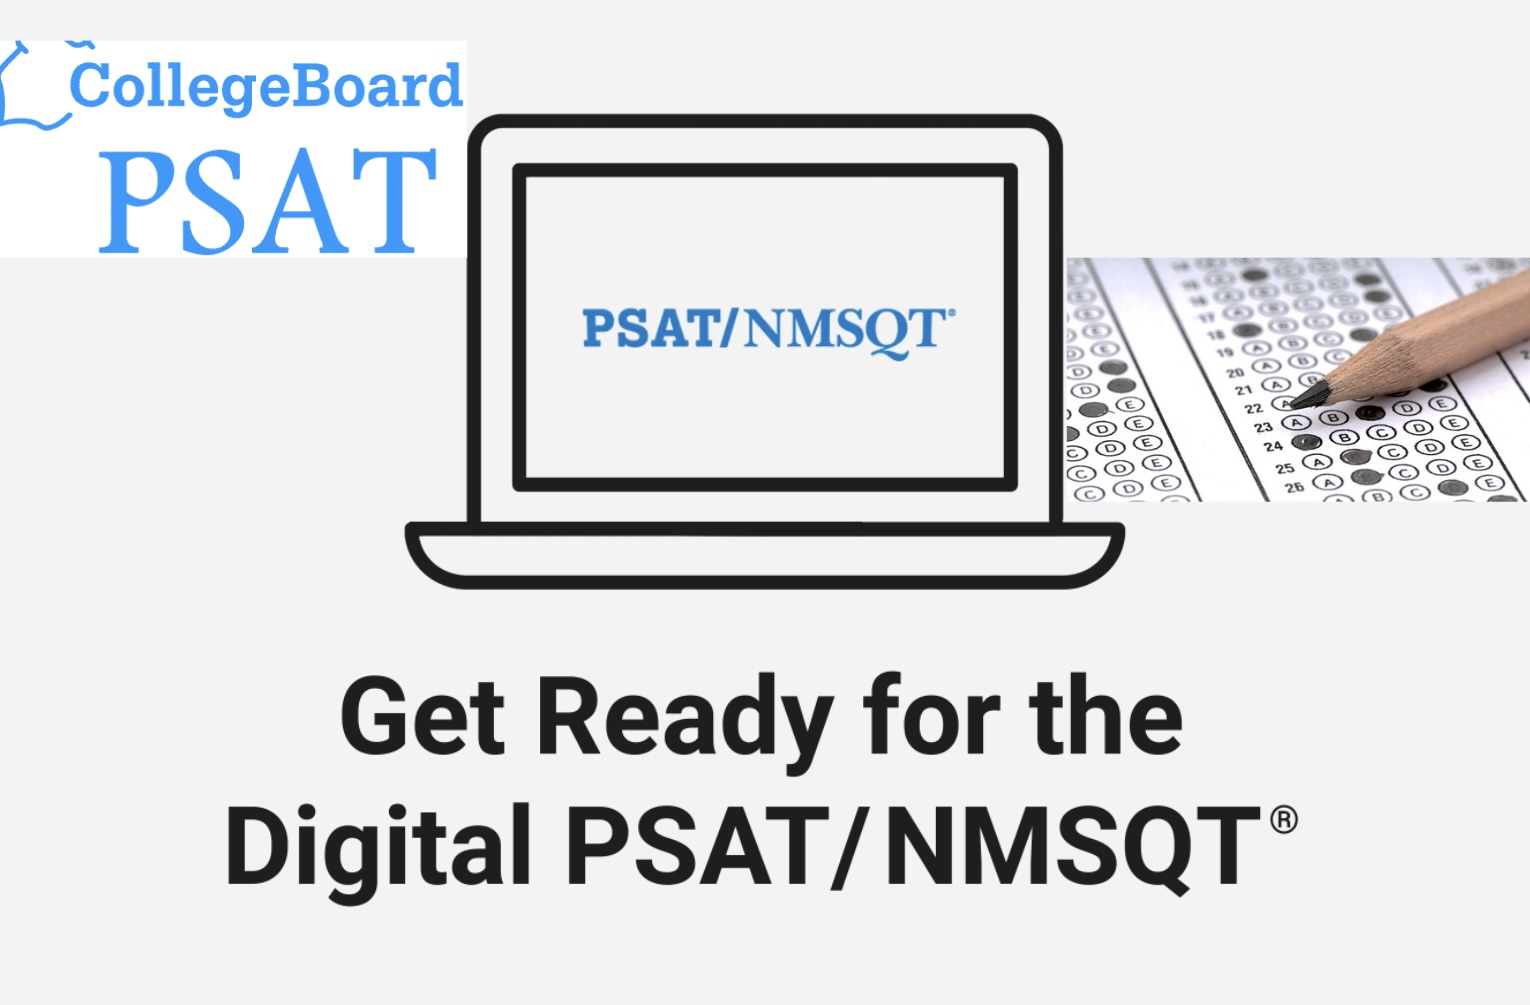  The PSAT is run by the College Board, who tracks each students’ score, along with each AP exam they take.